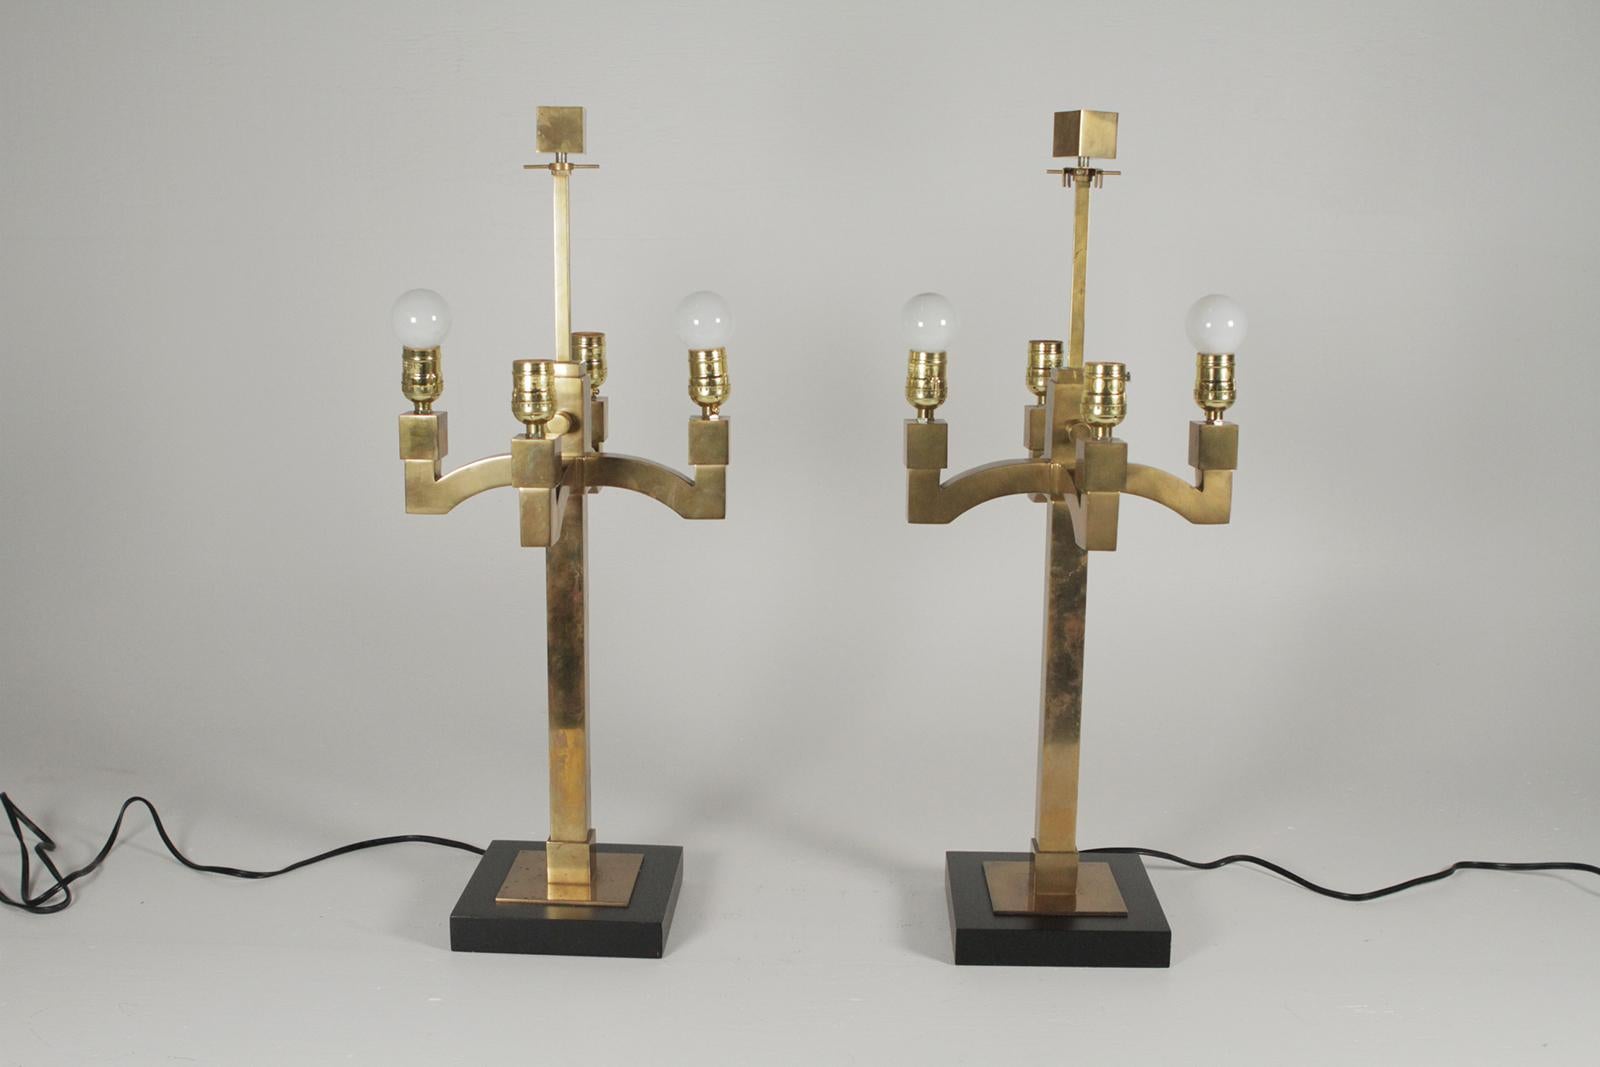 Pair Mid-Century Modern Brass Lamps Style Of Josef Hoffman Hand-Painted Shades
Dimensions 11”W x 11”D x 27”H.